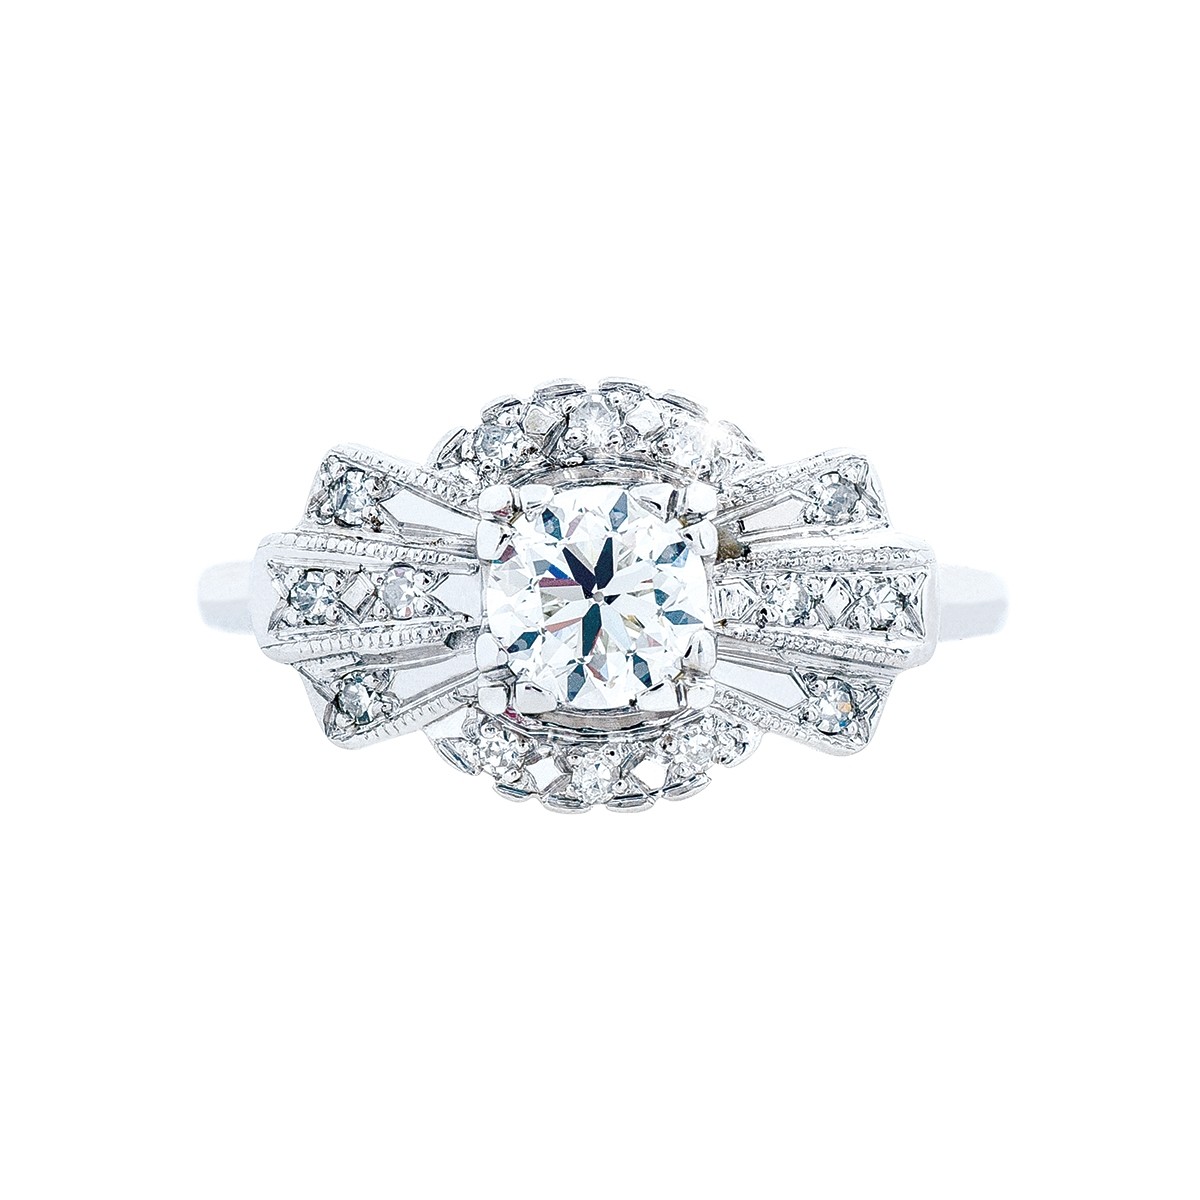 Antique engagement ring centered with a square diamond surrounded by smaller diamonds.